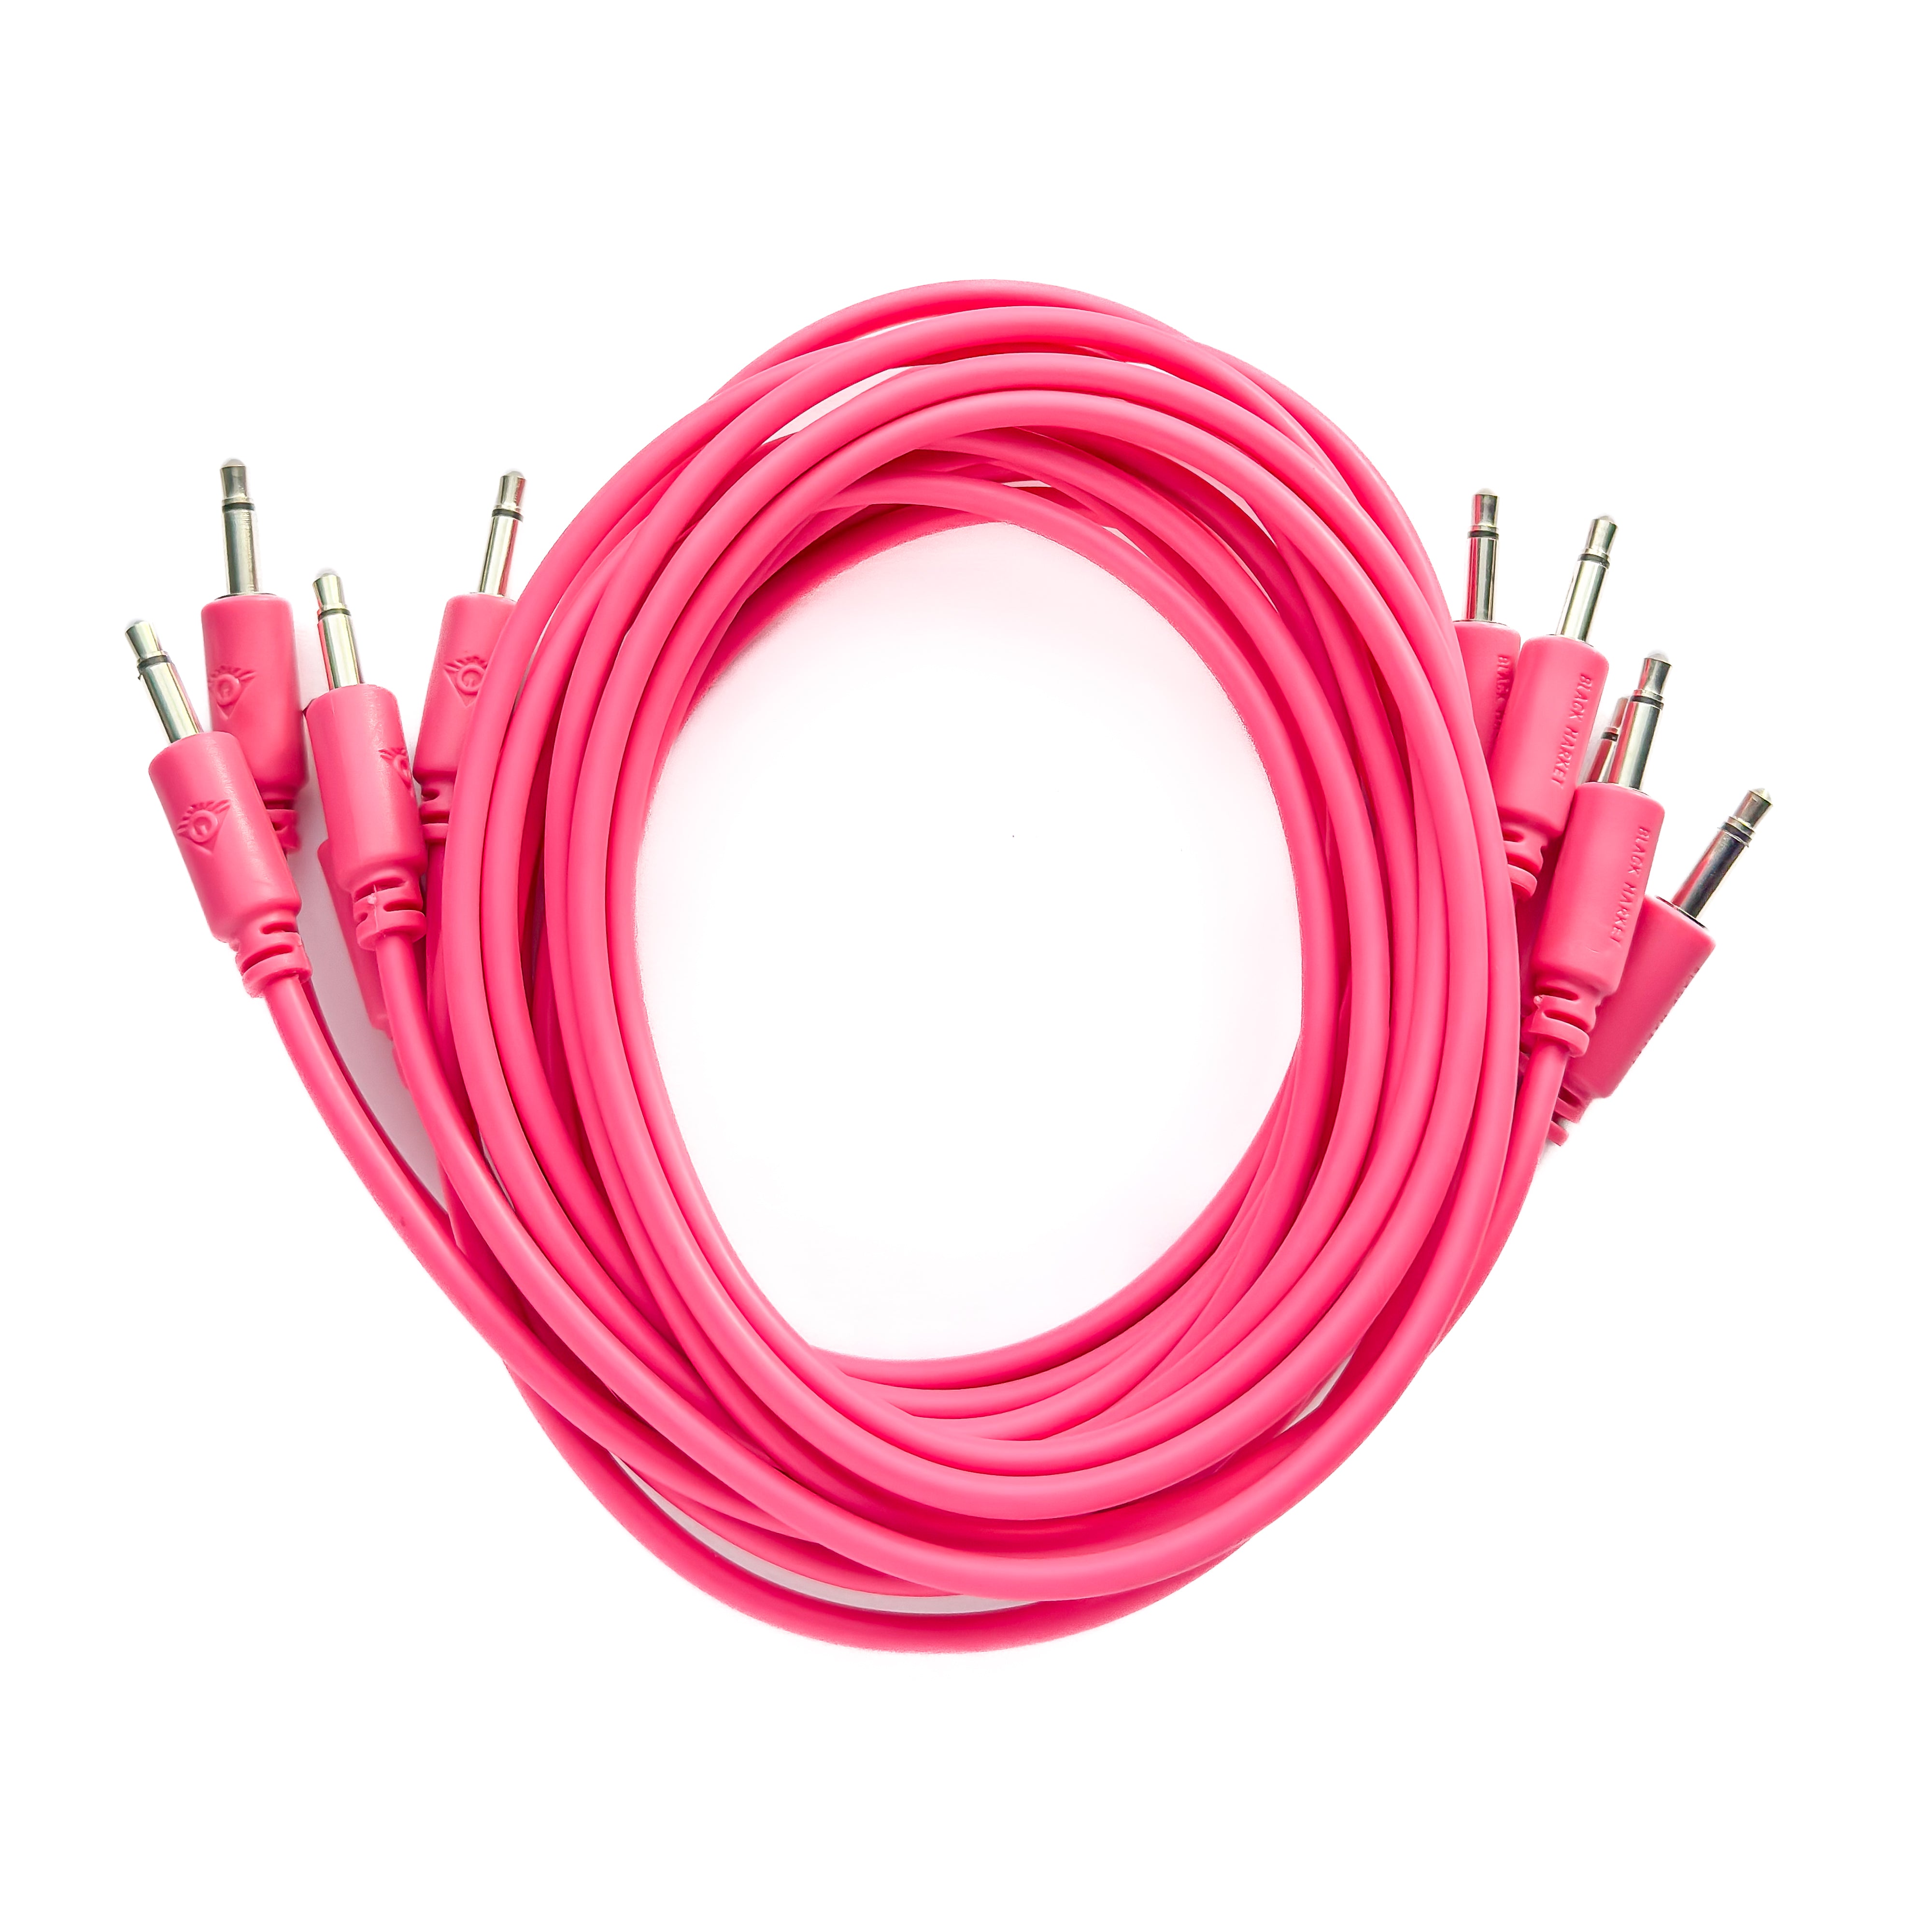 Black Market Modular 3.5mm Patch Cable 5-Pack - 100cm/40" - Pink View 1